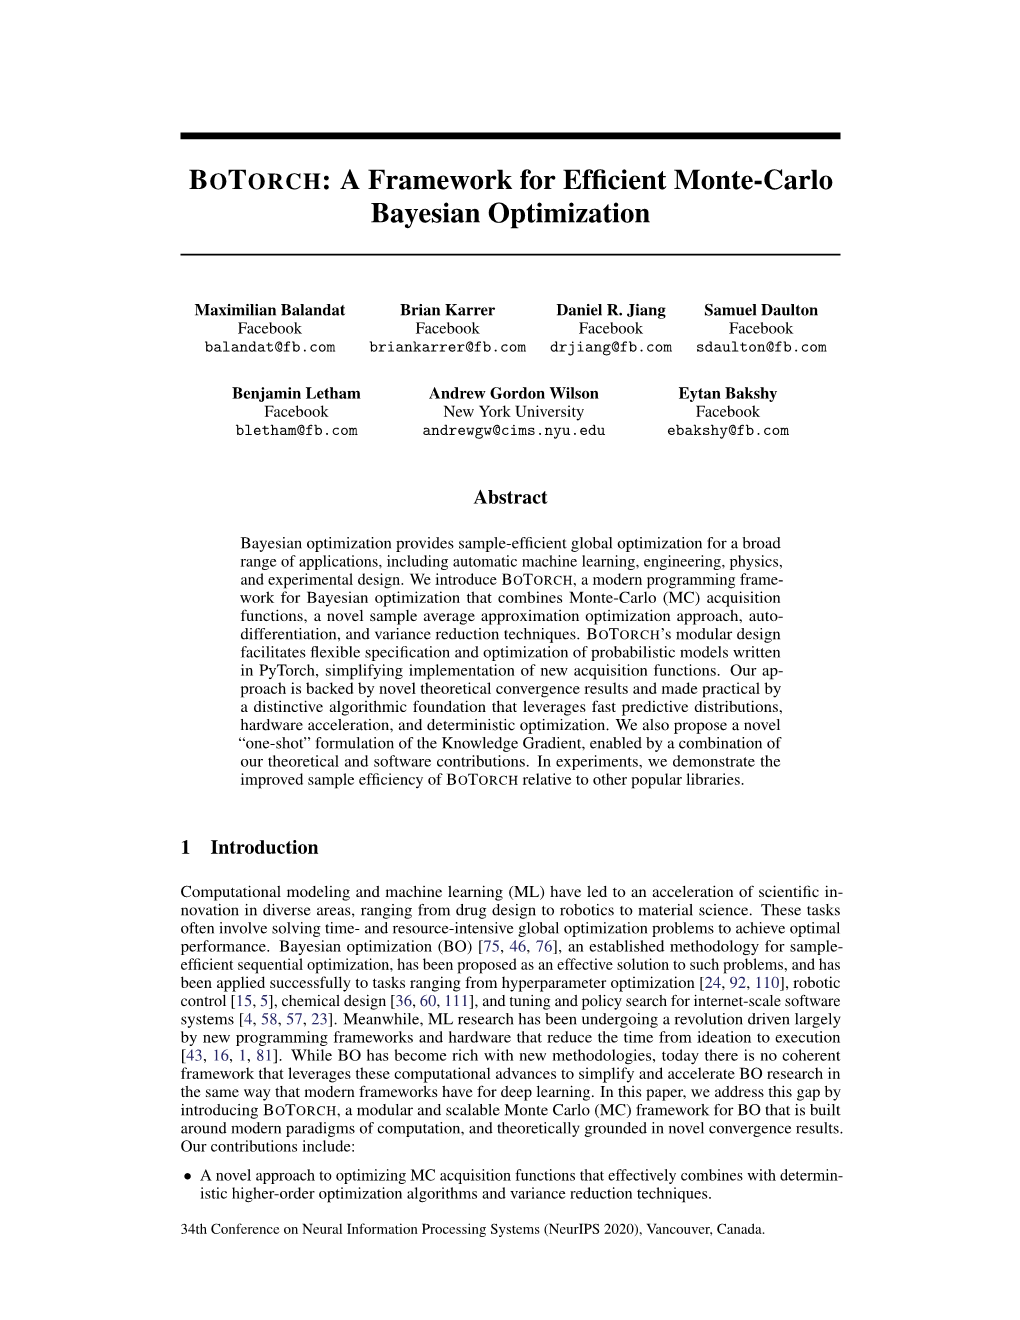 BOTORCH: a Framework for Efficient Monte-Carlo Bayesian Optimization